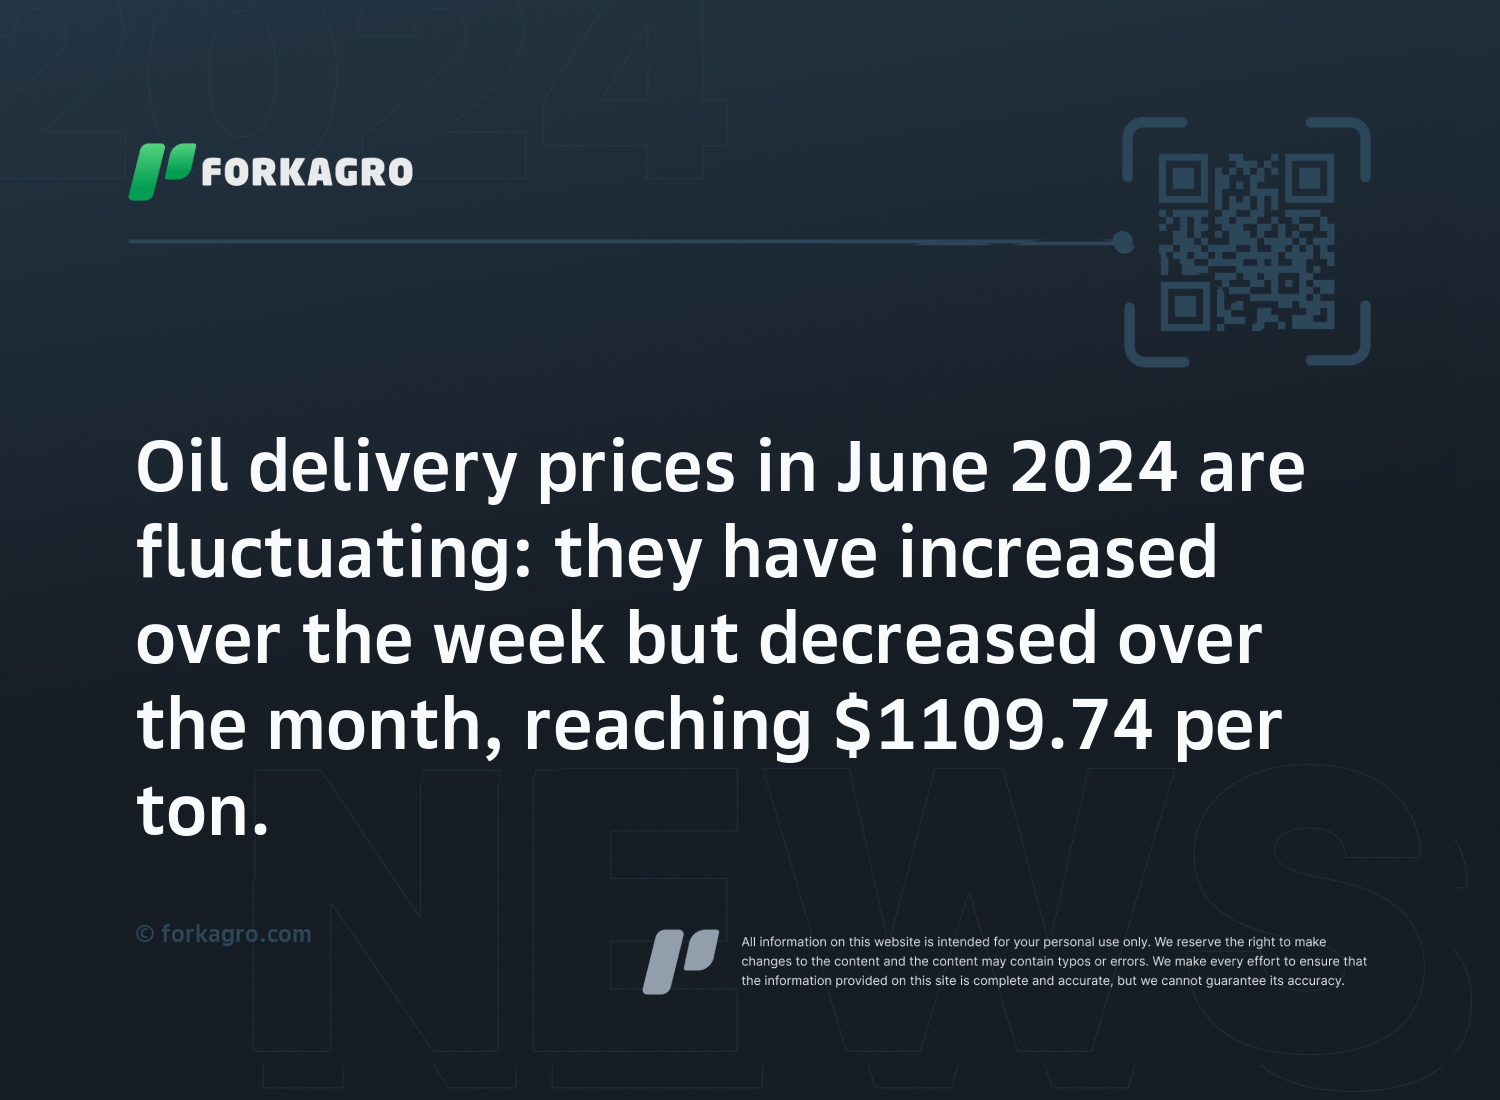 Oil delivery prices in June 2024 are fluctuating: they have increased over the week but decreased over the month, reaching $1109.74 per ton.